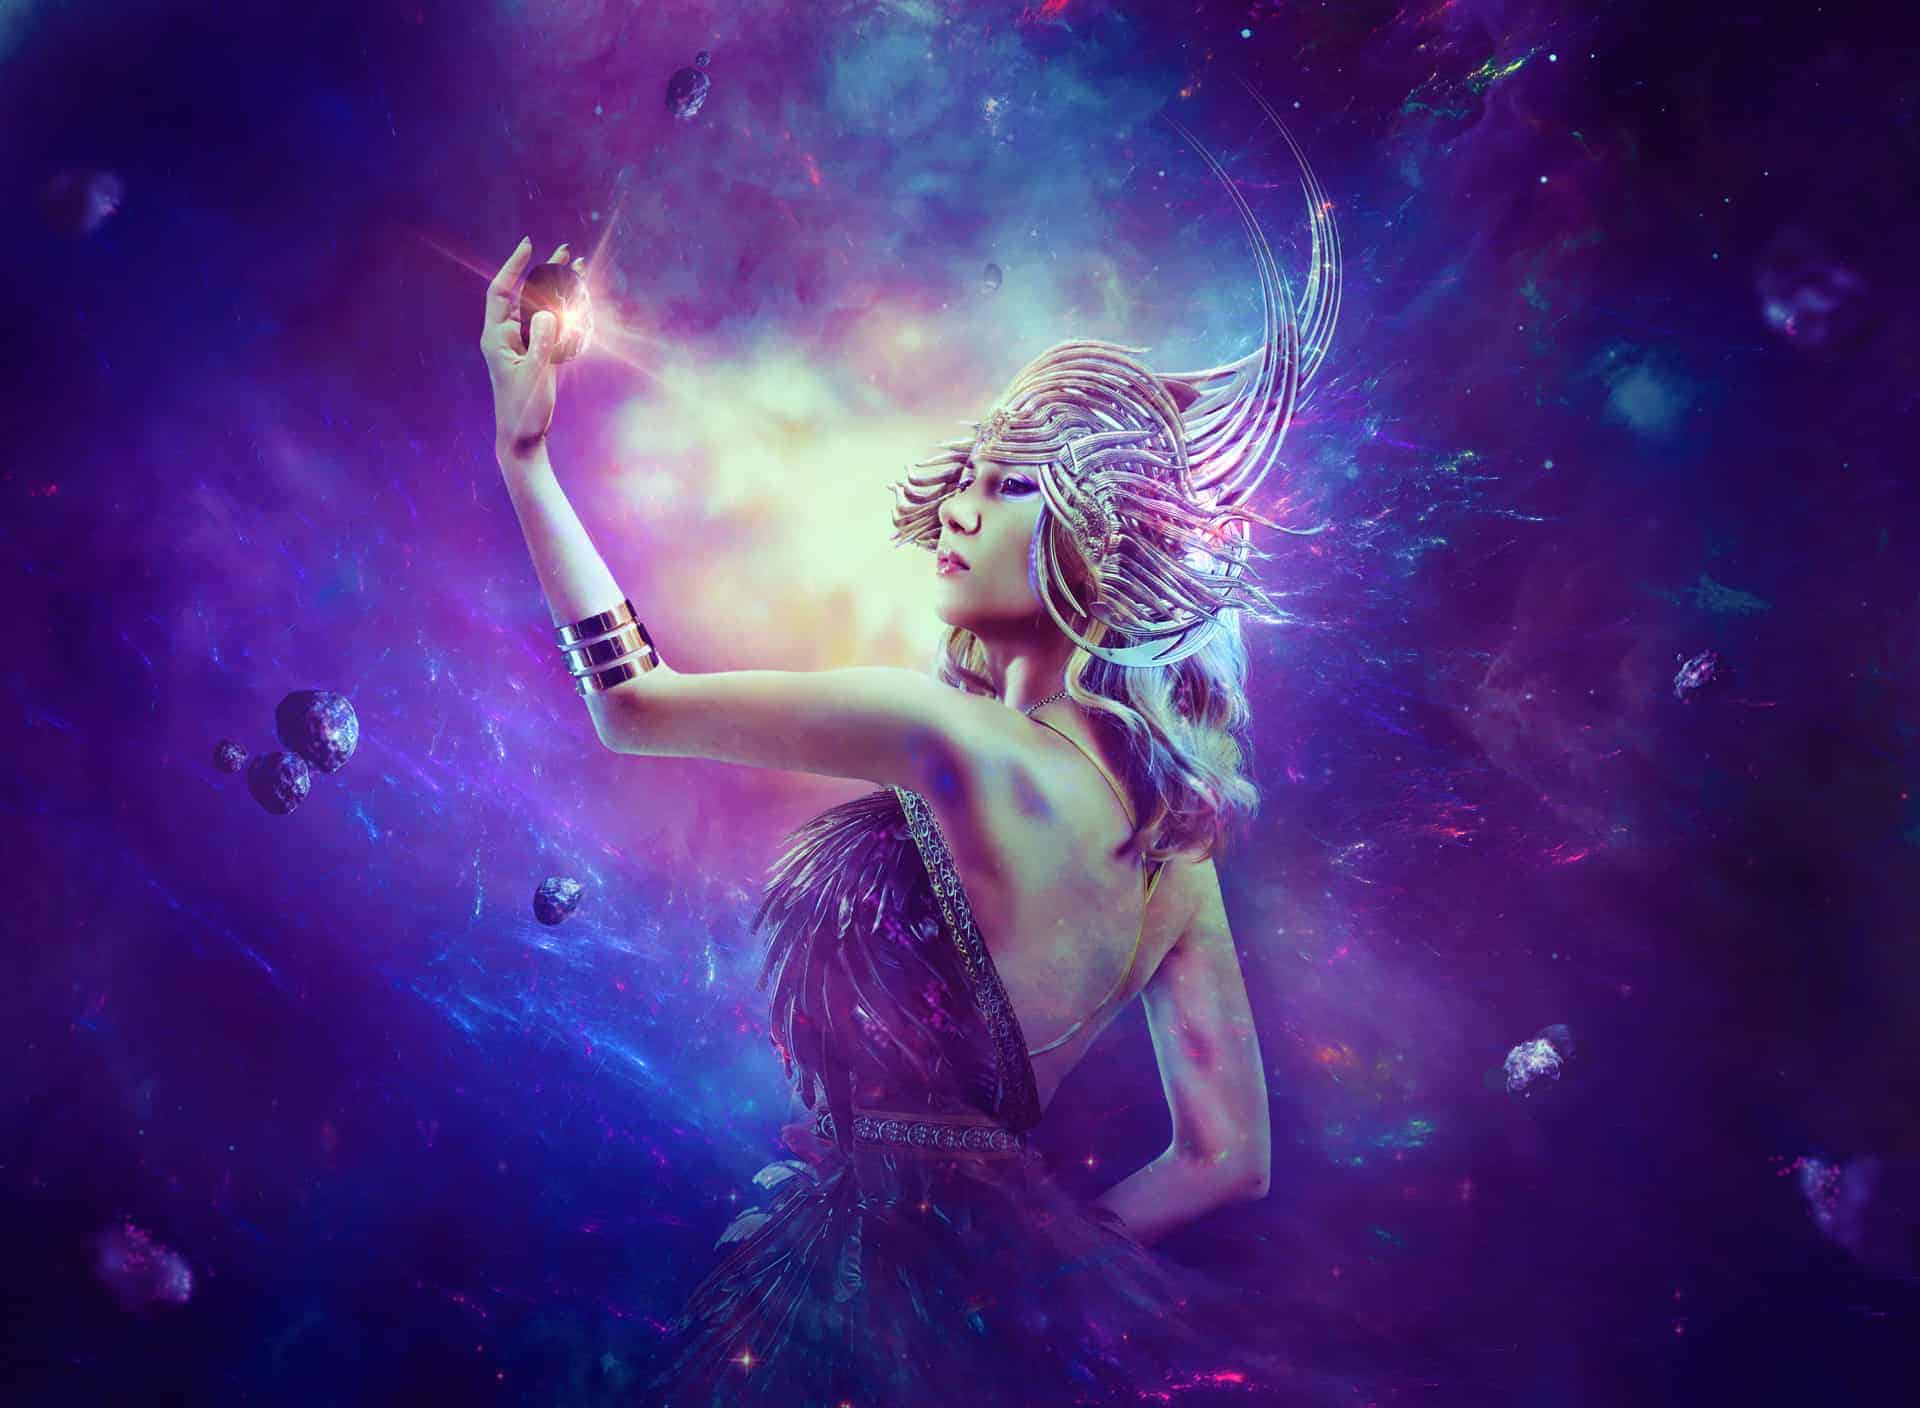 How to Create a Fantasy Woman Photo Manipulation with Adobe